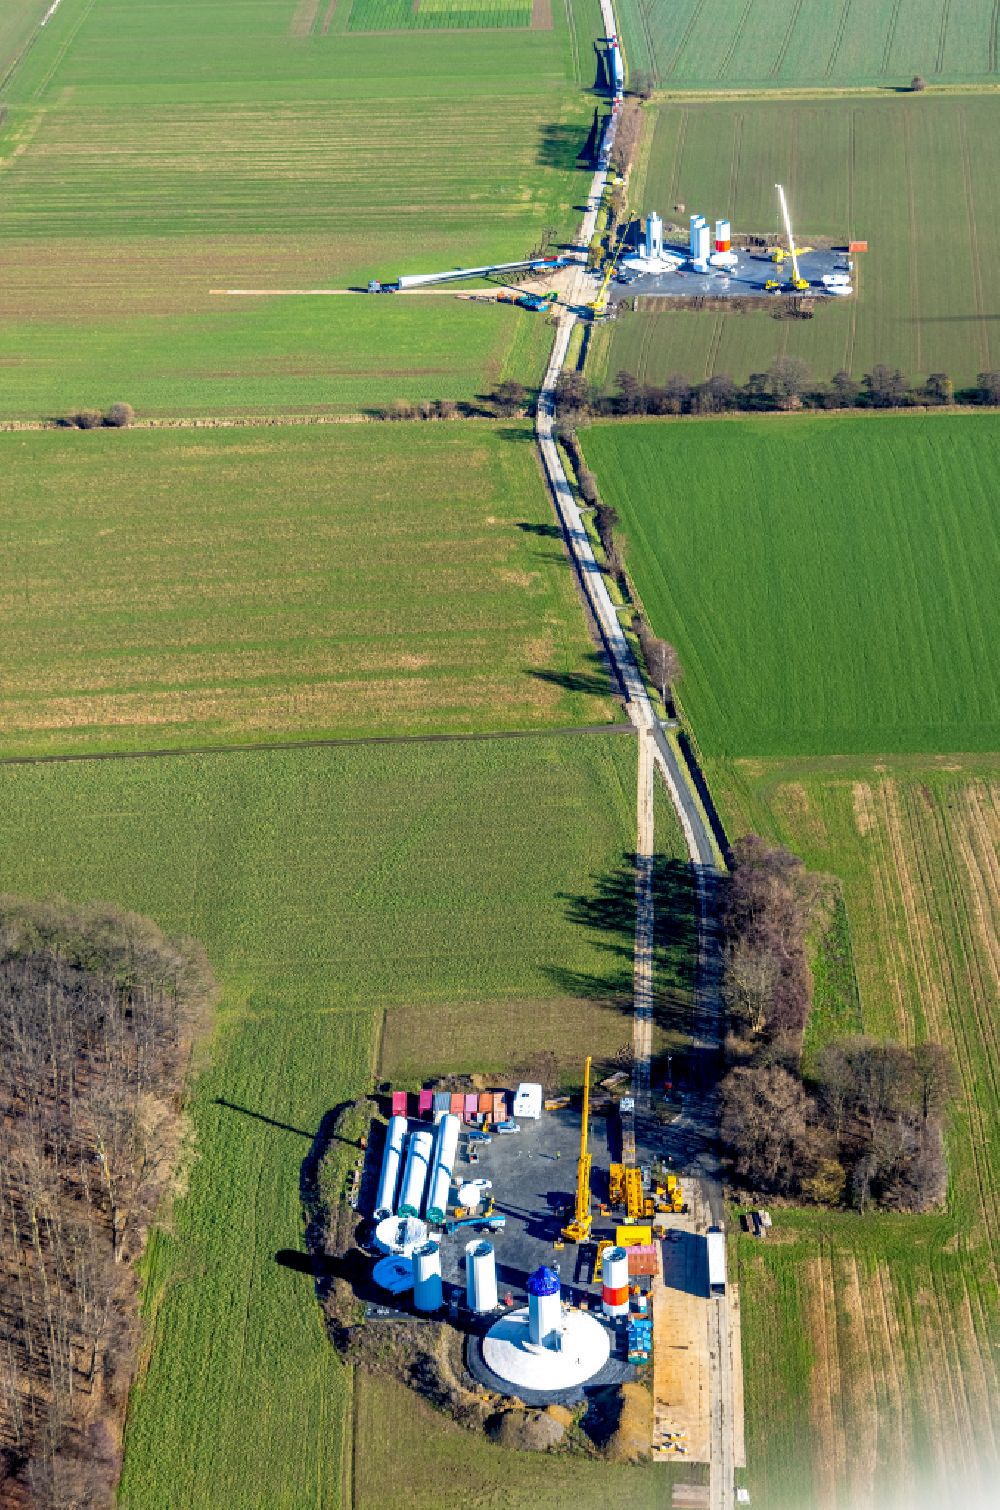 Freiske from above - Construction site for wind turbine tower assembly on a field in Freiske in the Ruhr area in the state of North Rhine-Westphalia, Germany